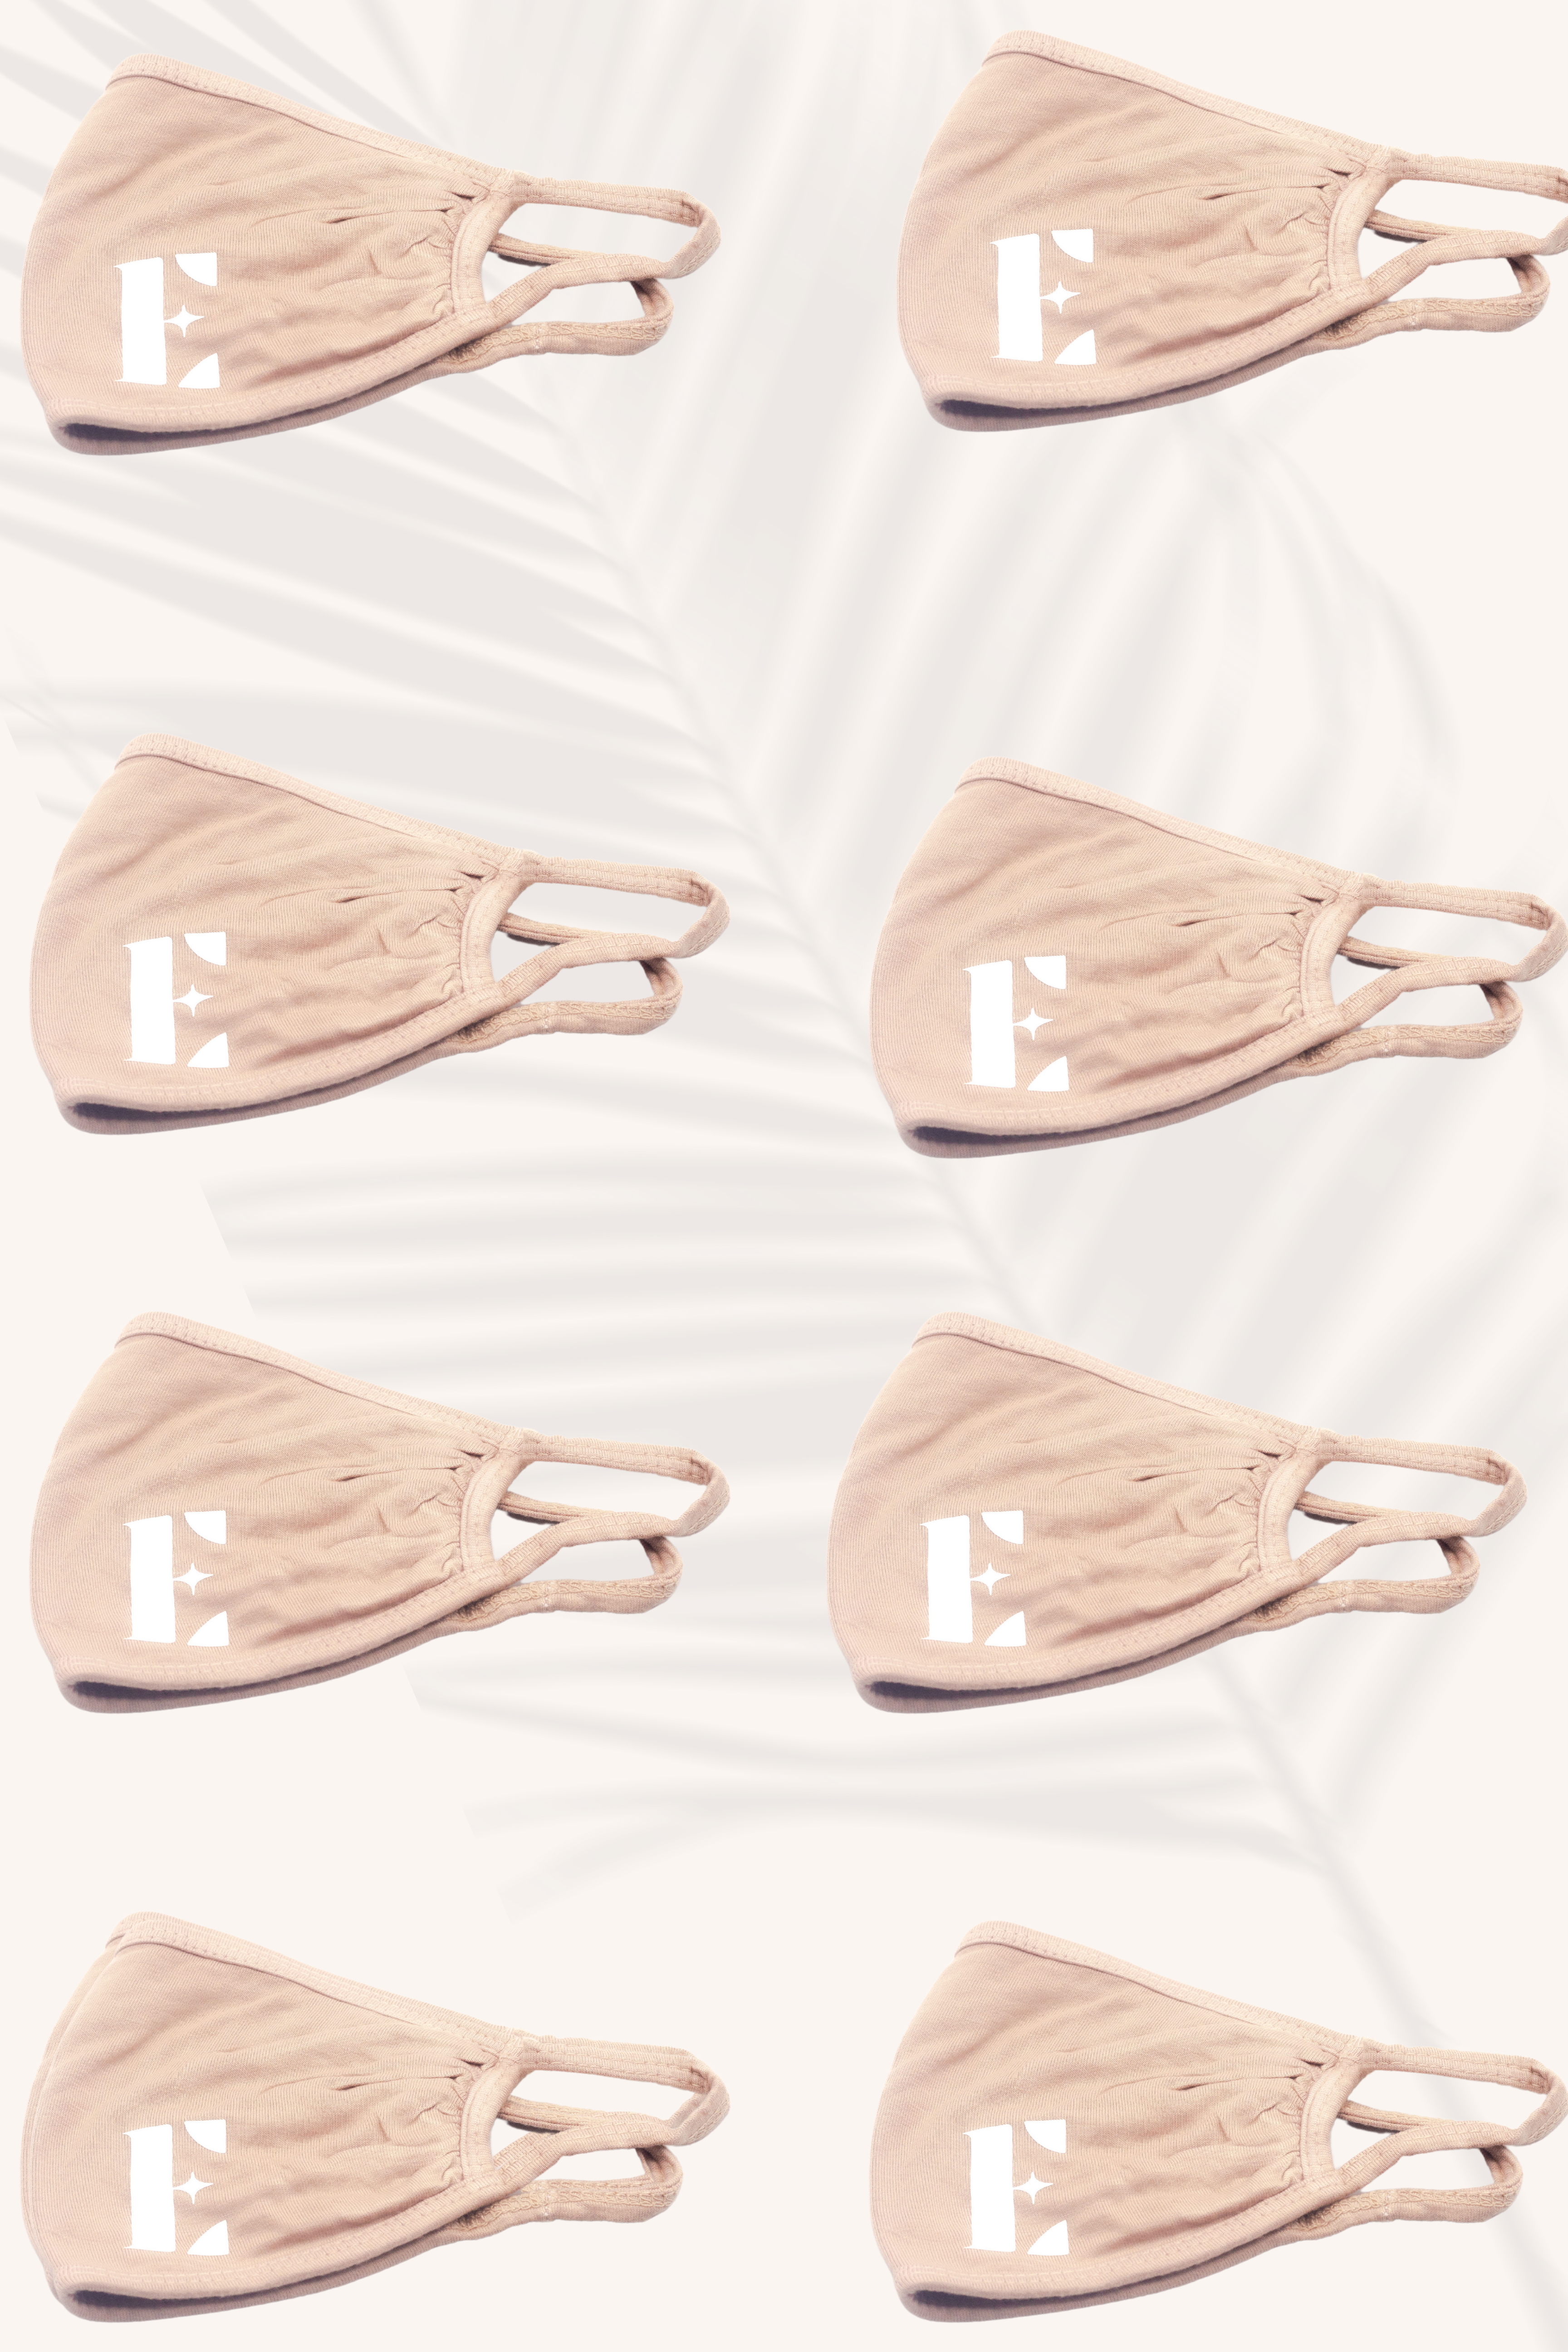 Eight Beige Pink Face Masks by E's Element placed in a 2x4 pattern. The face masks have the E's Element logo imprinted in white on the bottom left.